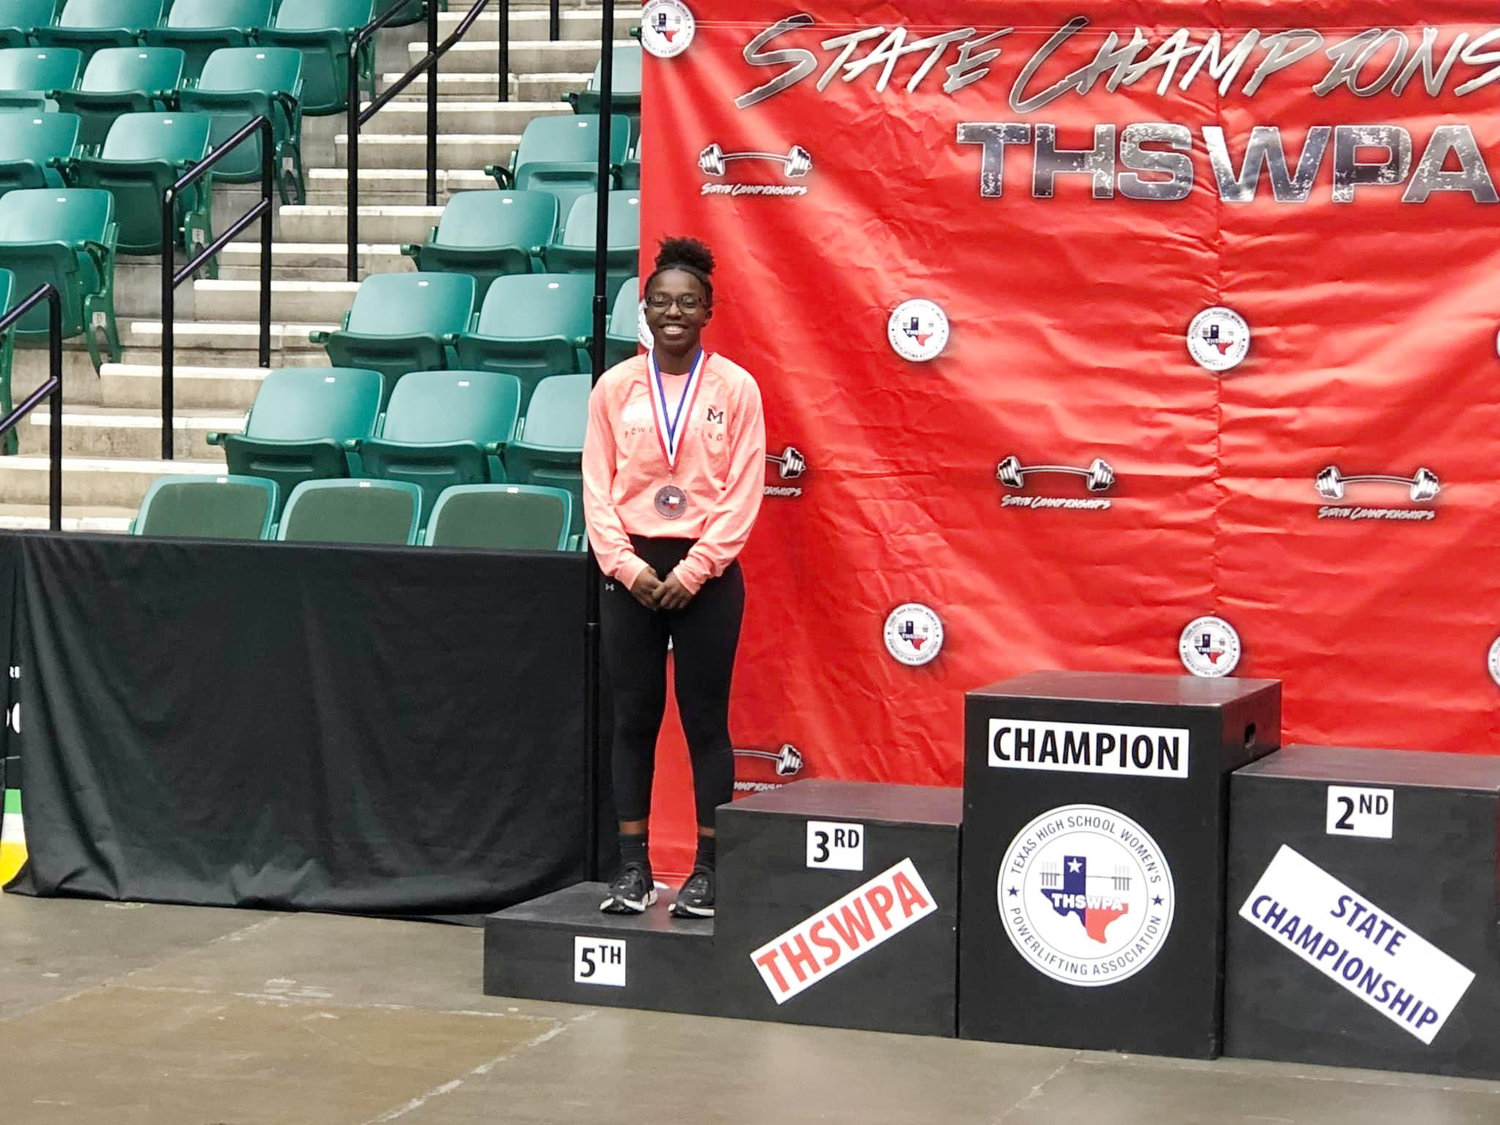 Shylah Kratzmeyer of Mineola earned a fifth place medal in the 3A large school division at the Texas High School Women’s Powerlifting Association championships last week in Frisco.